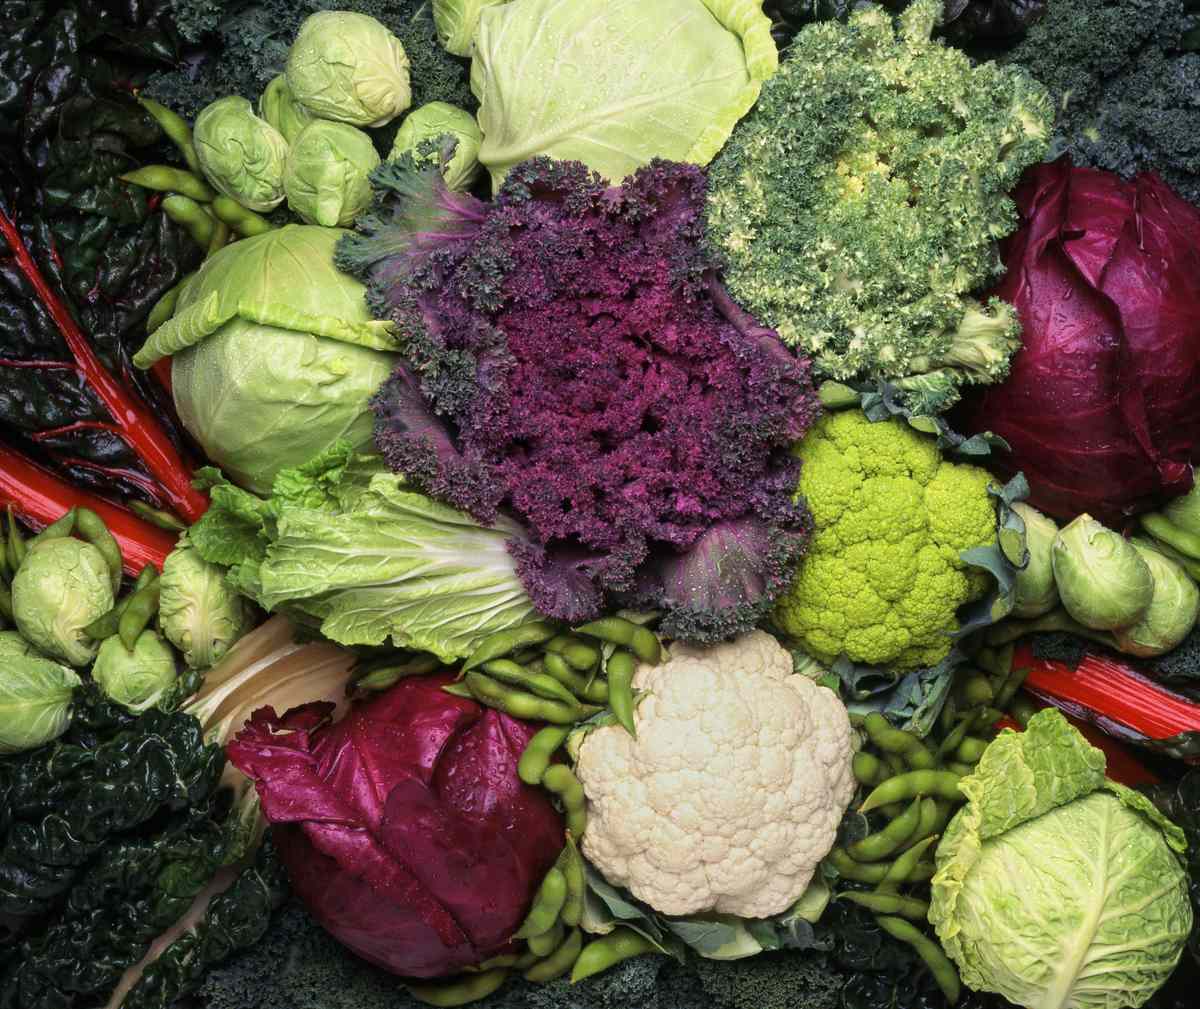 Kale, Cauliflower, Brussels Sprouts, and Other Cruciferous Vegetables